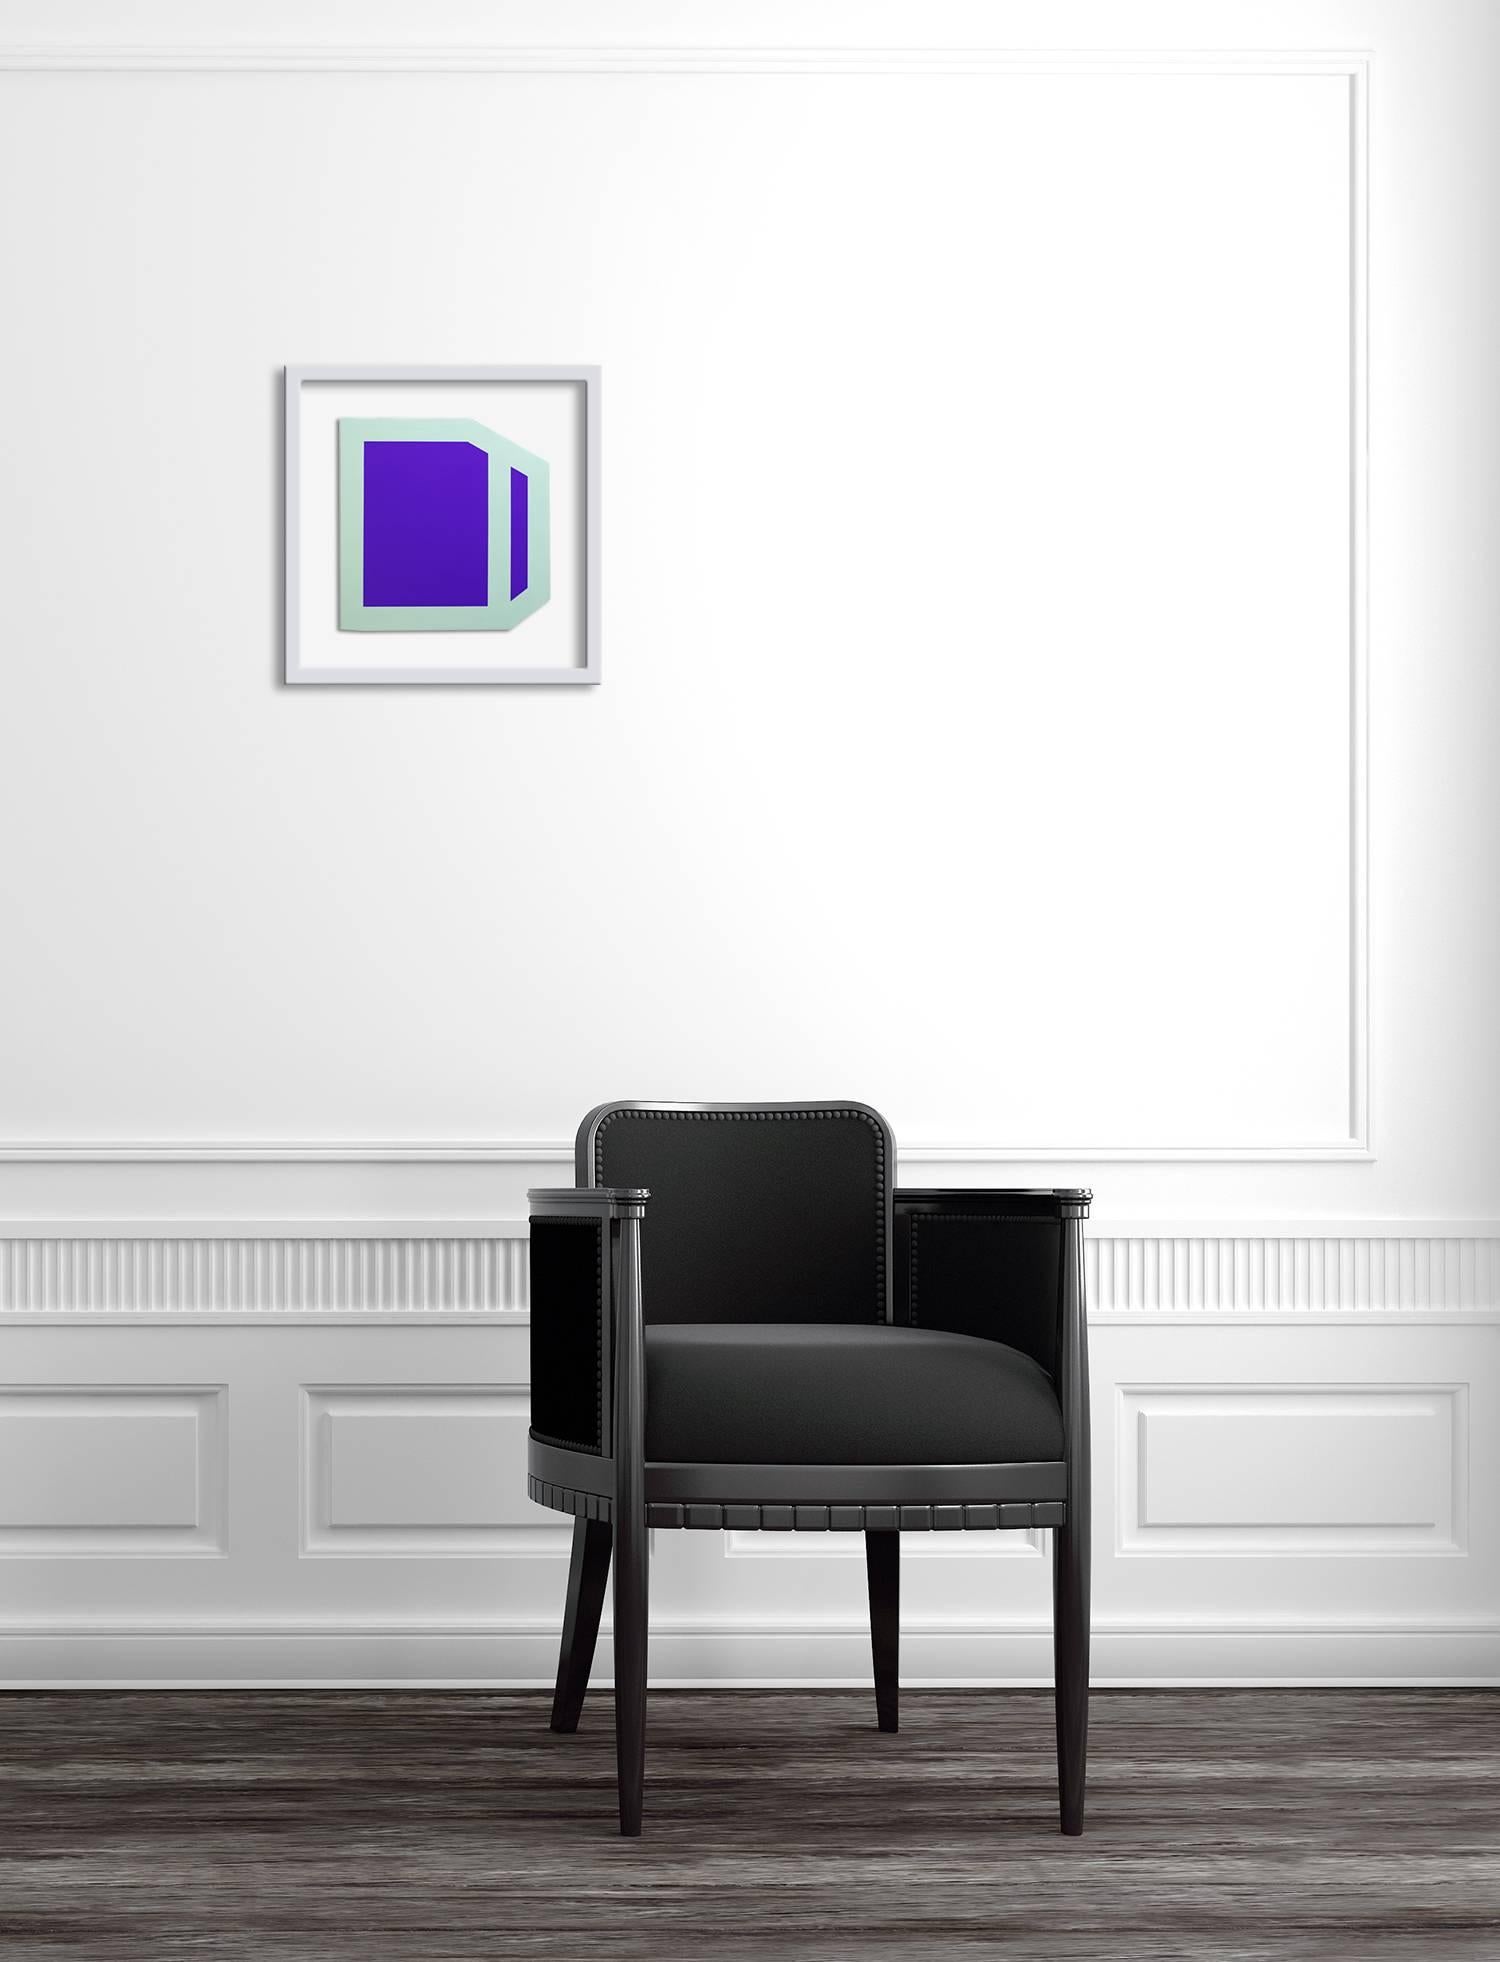 Plumb Purple (mint) (Abstract Painting) For Sale 1